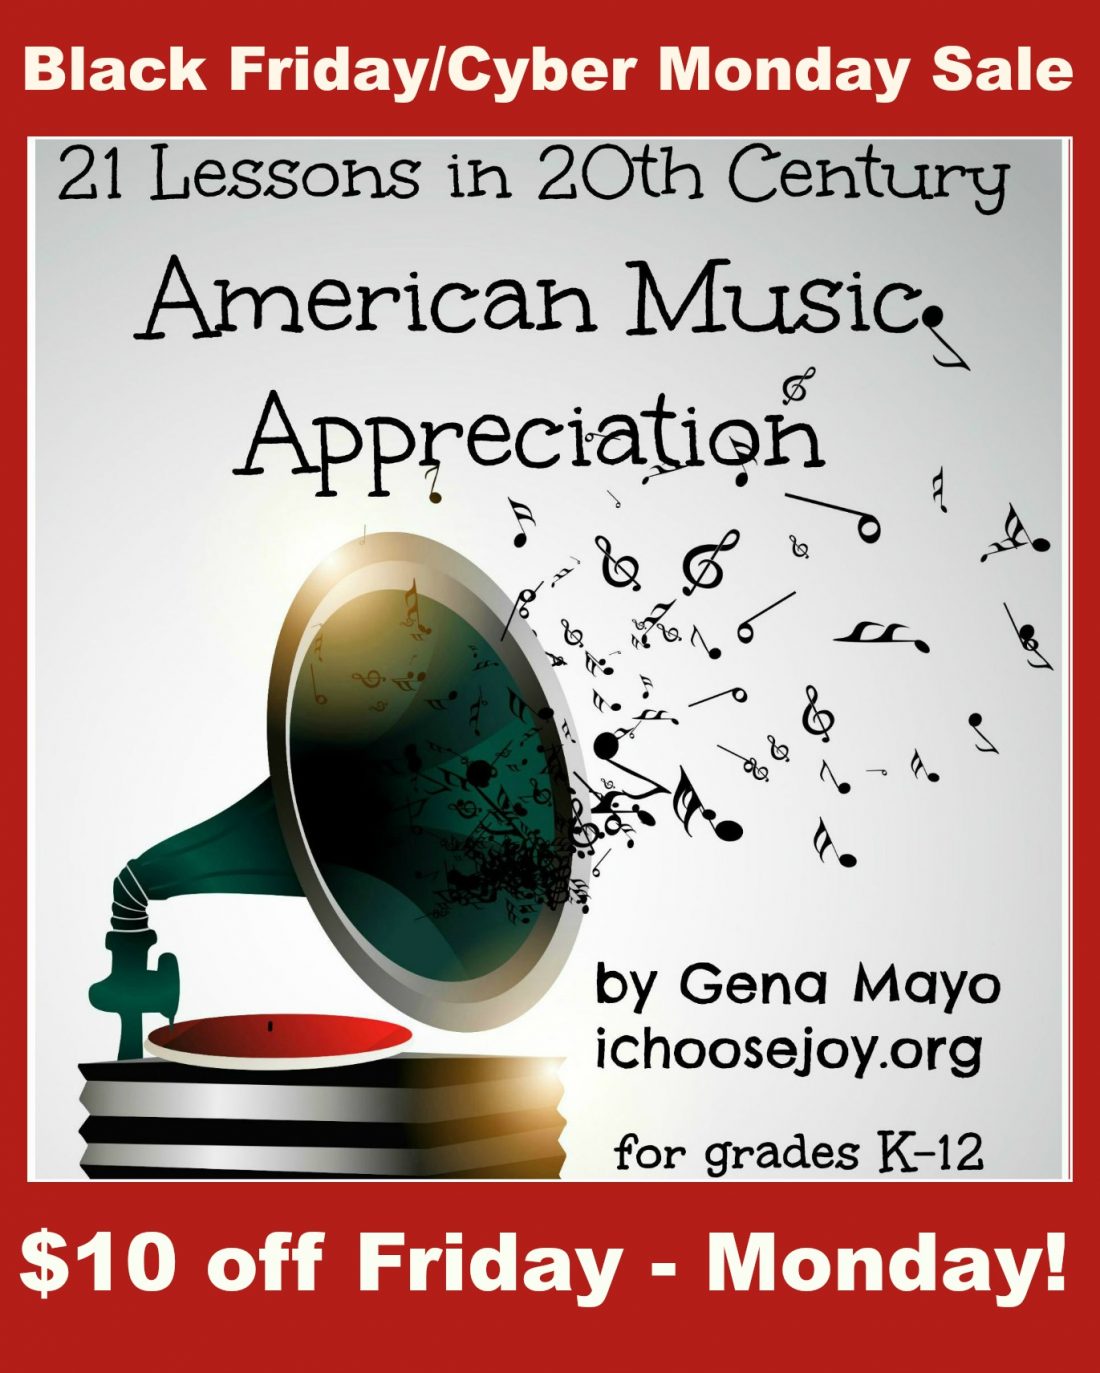 21 Lessons in 20th Century American Music Appreciation Black Friday/ Cyber Monday $10 off sale